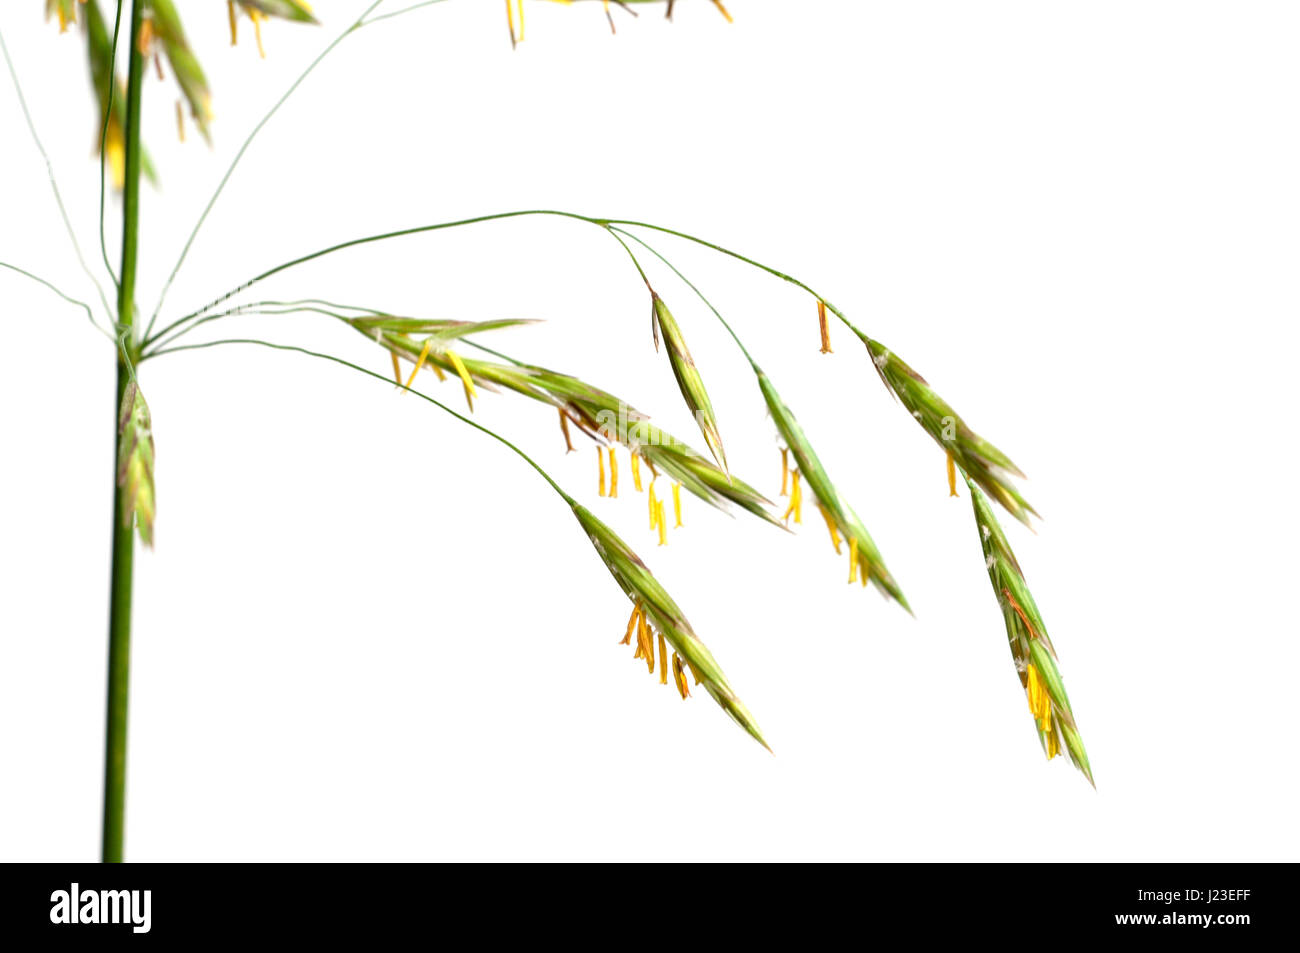 Awnless brome (Bromopsis inermis) over white background Stock Photo